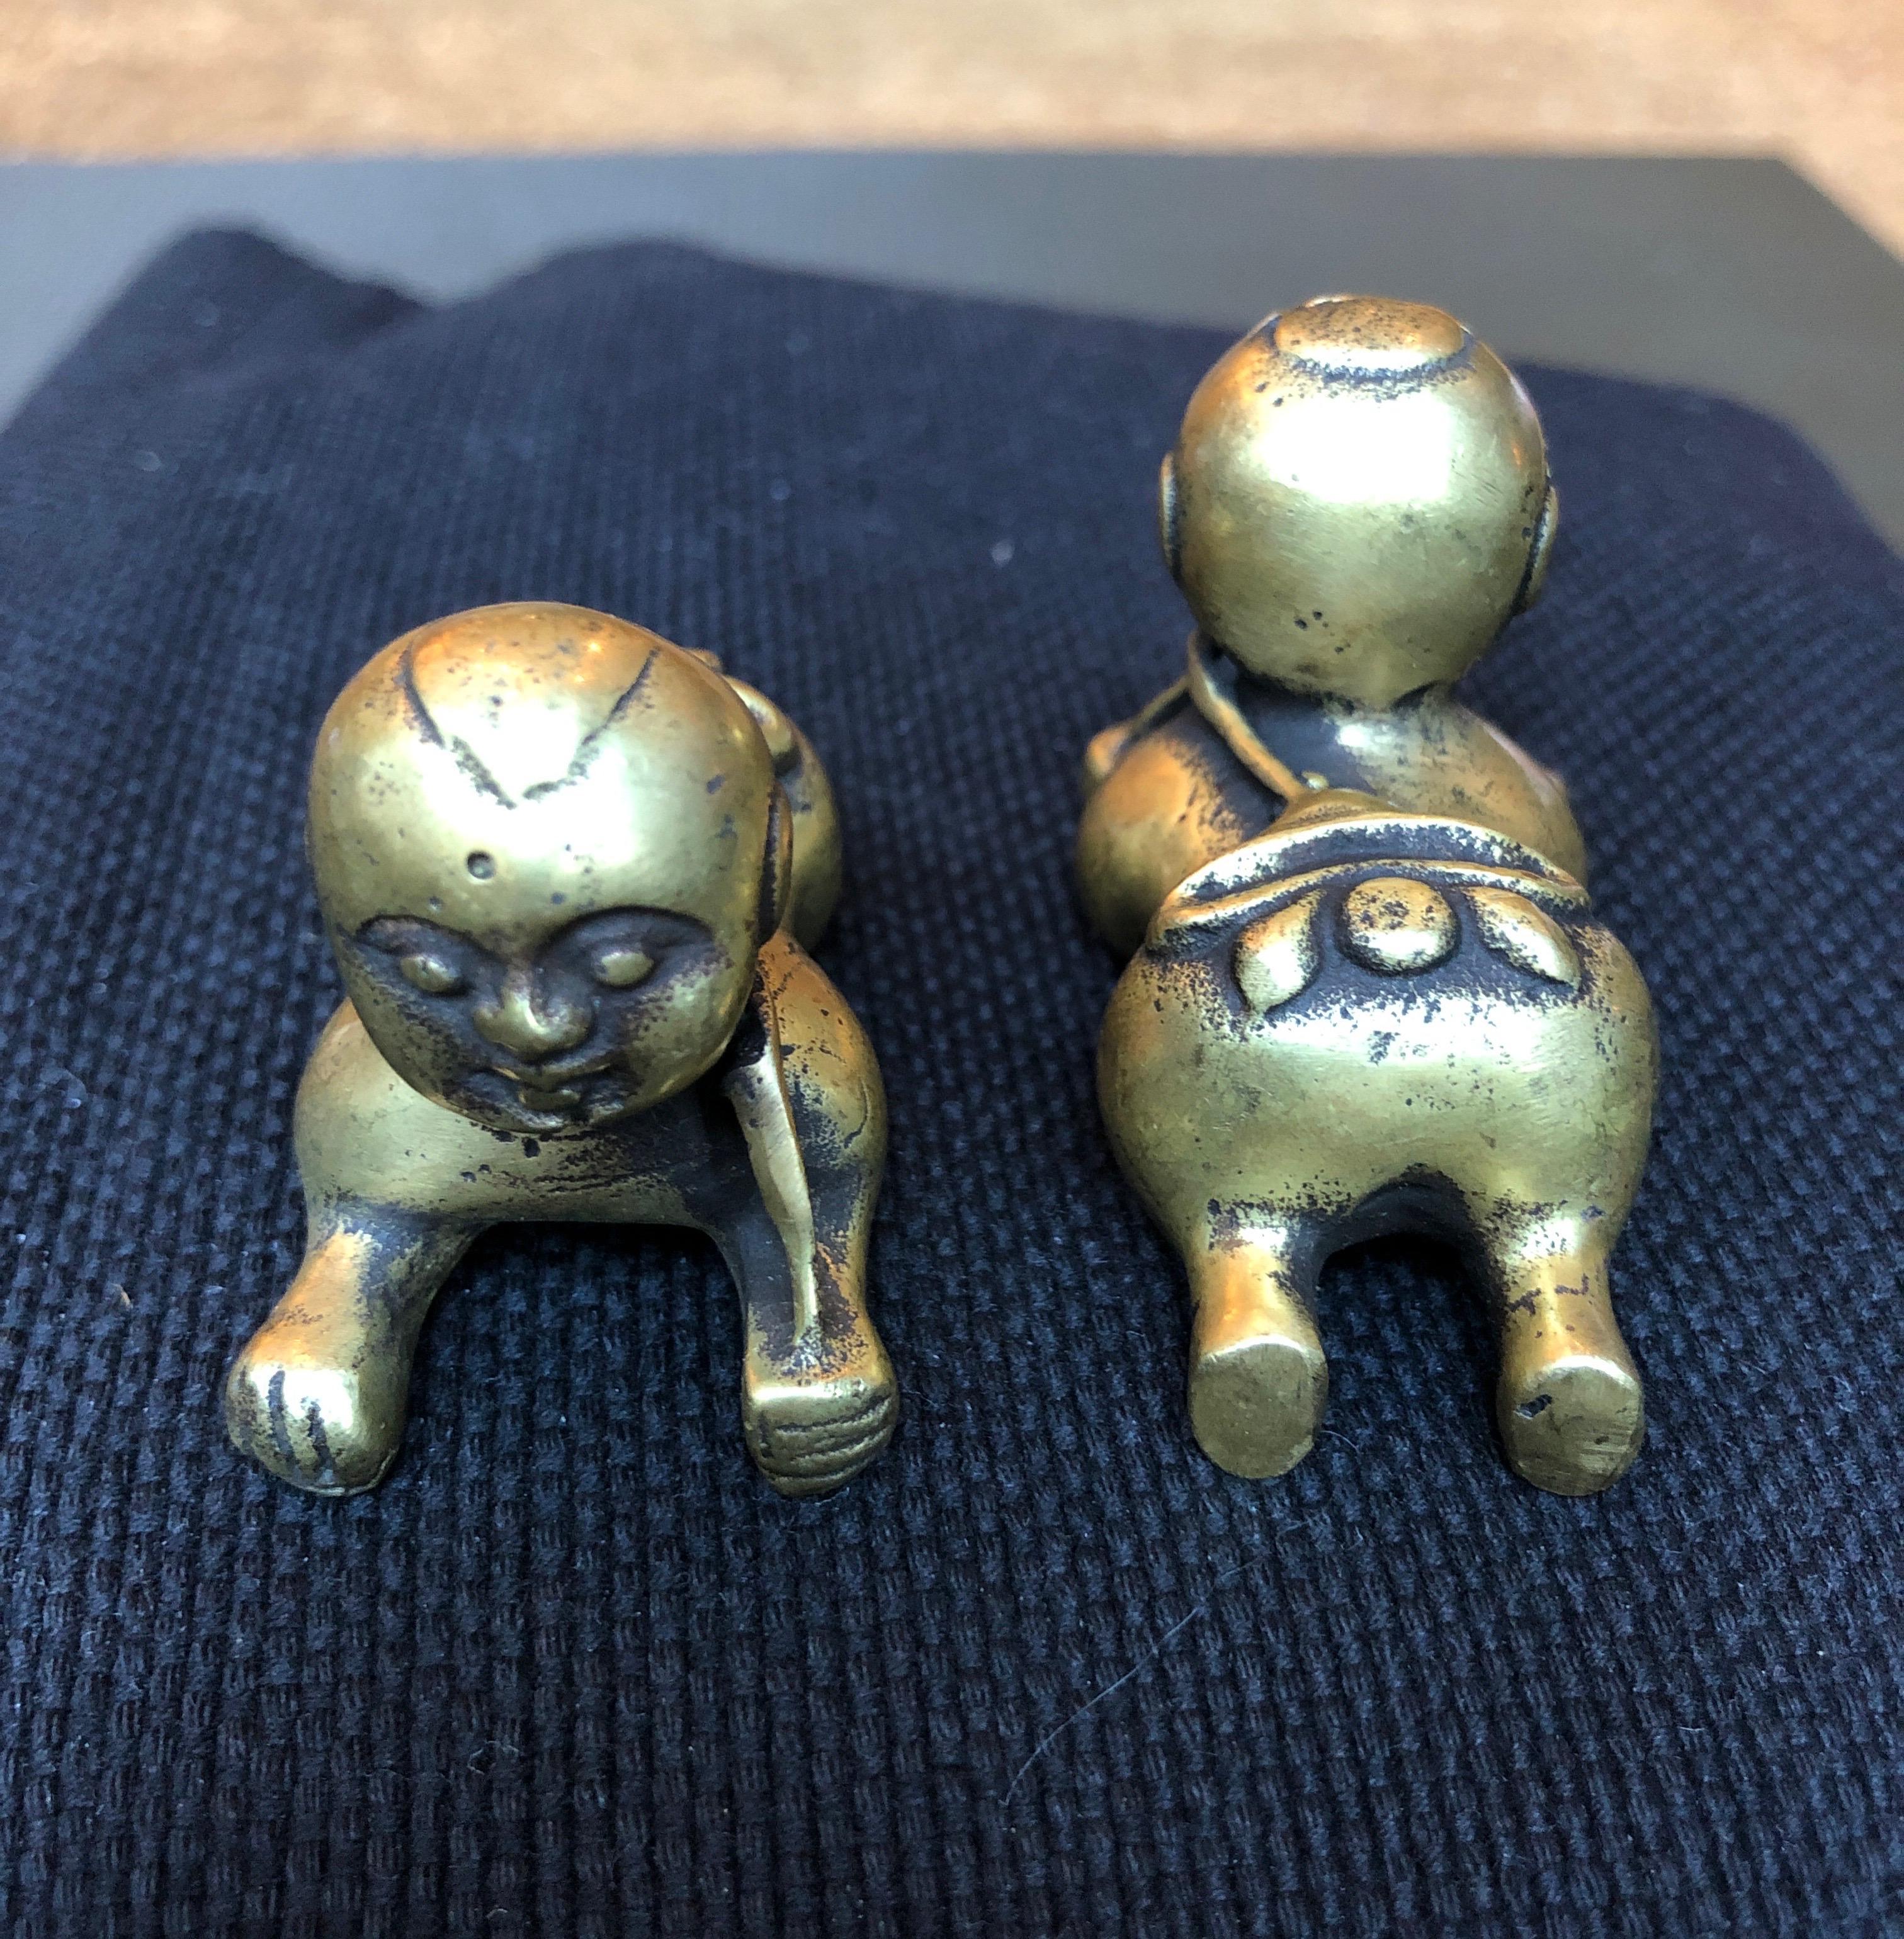 The most adorable pair of vintage crawling baby bronzes you have ever seen. Viewed from the front or back, they will put a smile on your face. Great shelf pieces. Priced as a pair. China, Republic Period.